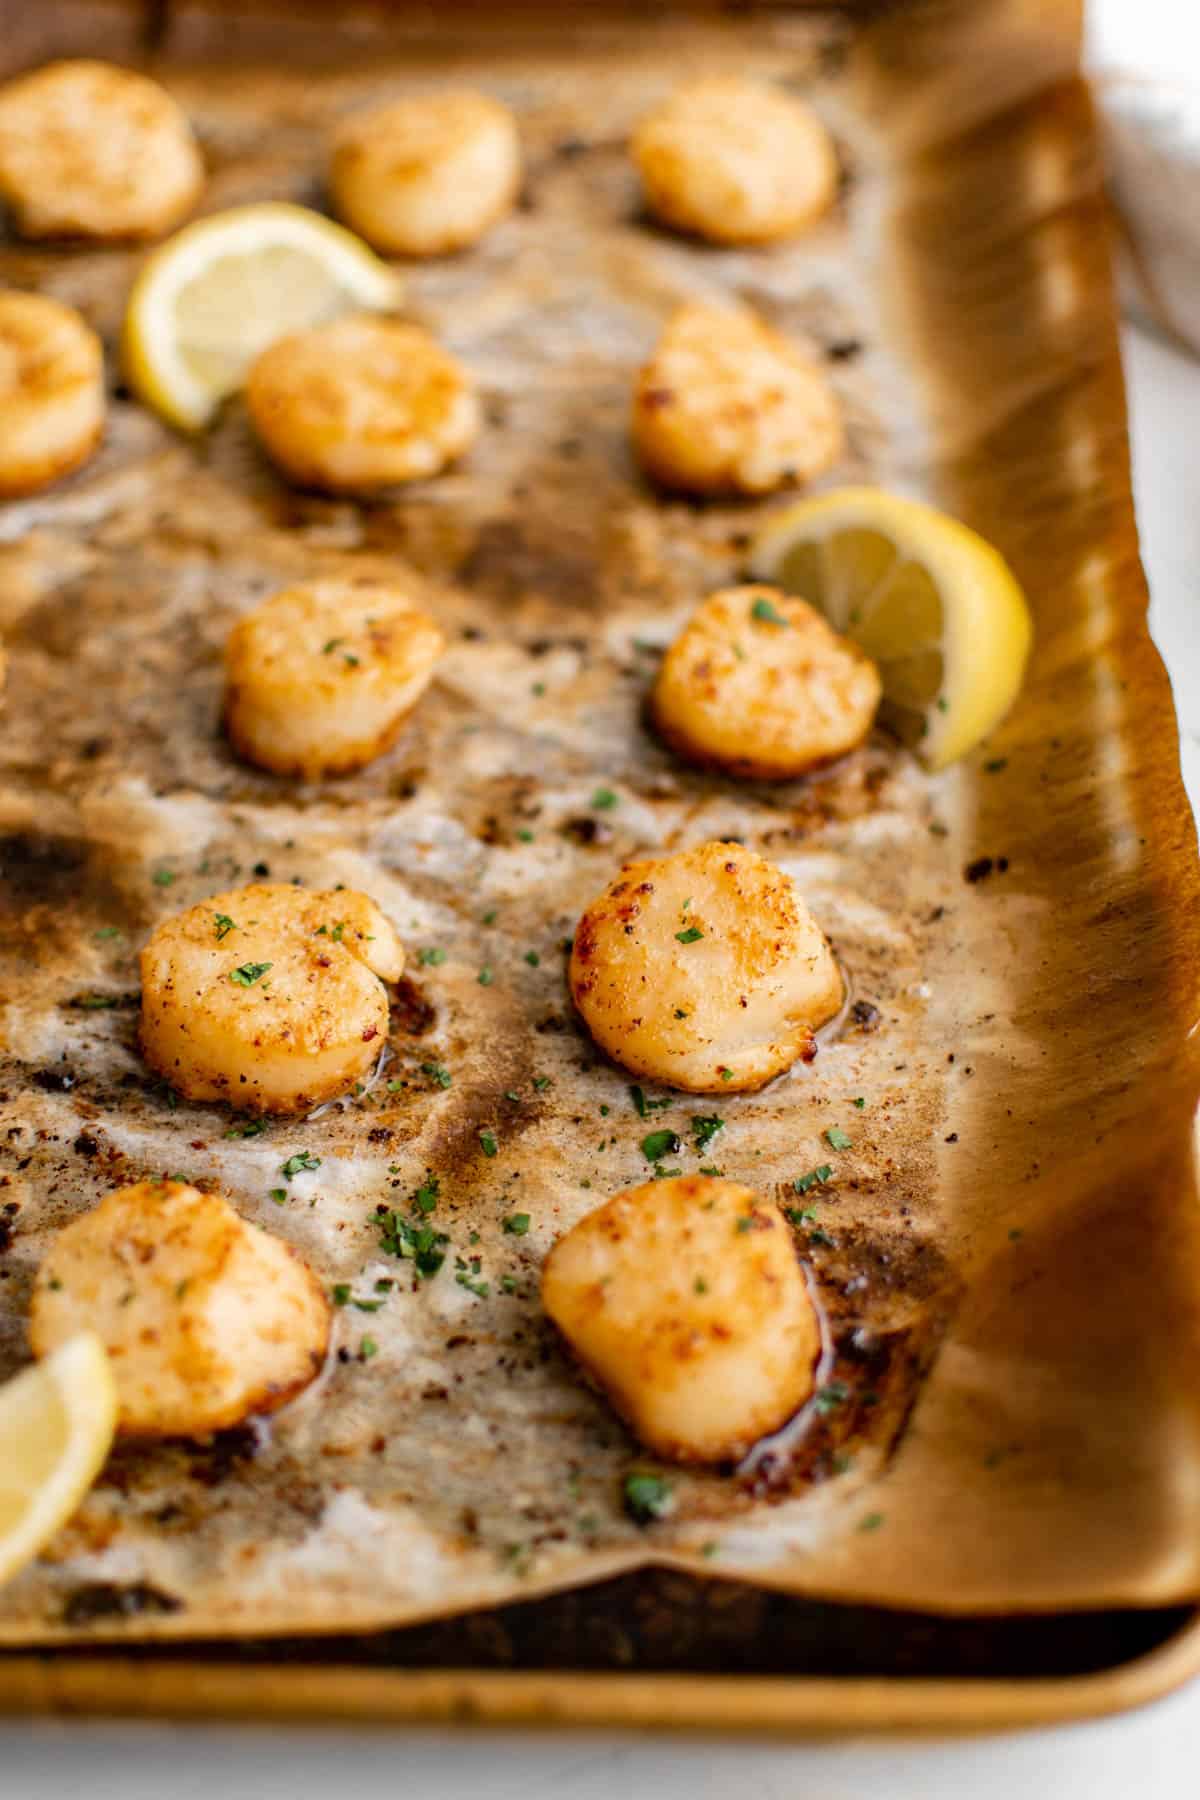 Broiled scallops on a sheet pan before serving.